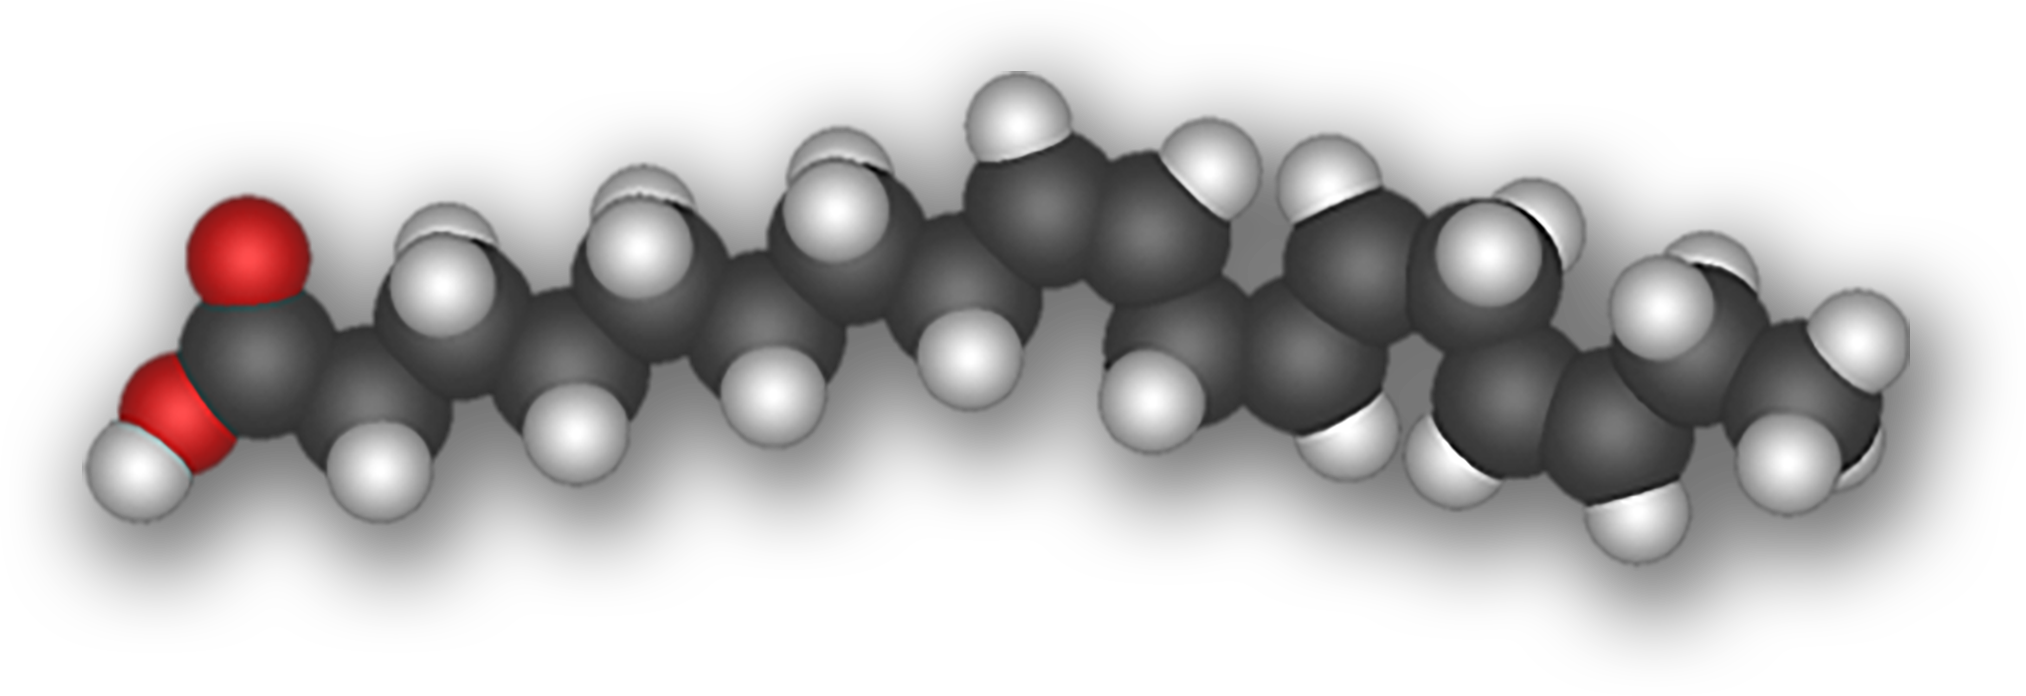 The molecular structure of an 18-carbon fatty acid.